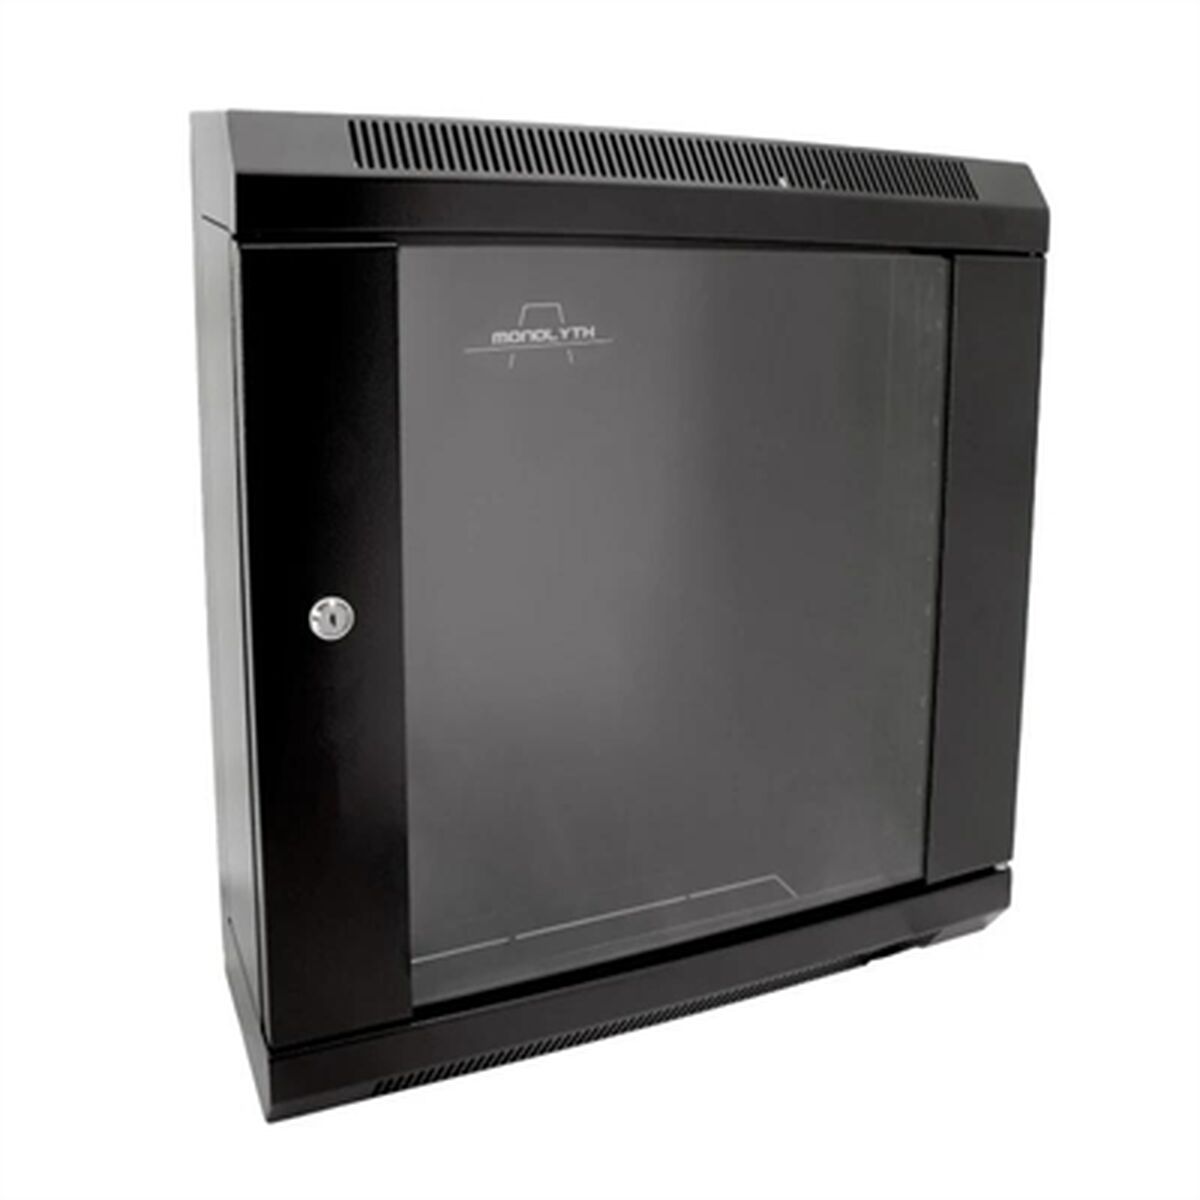 Wall-mounted Rack Cabinet Monolyth WM6115, Monolyth, Computing, Accessories, wall-mounted-rack-cabinet-monolyth-wm6115, Brand_Monolyth, category-reference-2609, category-reference-2803, category-reference-2828, category-reference-t-19685, category-reference-t-19908, category-reference-t-21349, Condition_NEW, furniture, networks/wiring, organisation, Price_50 - 100, Teleworking, RiotNook